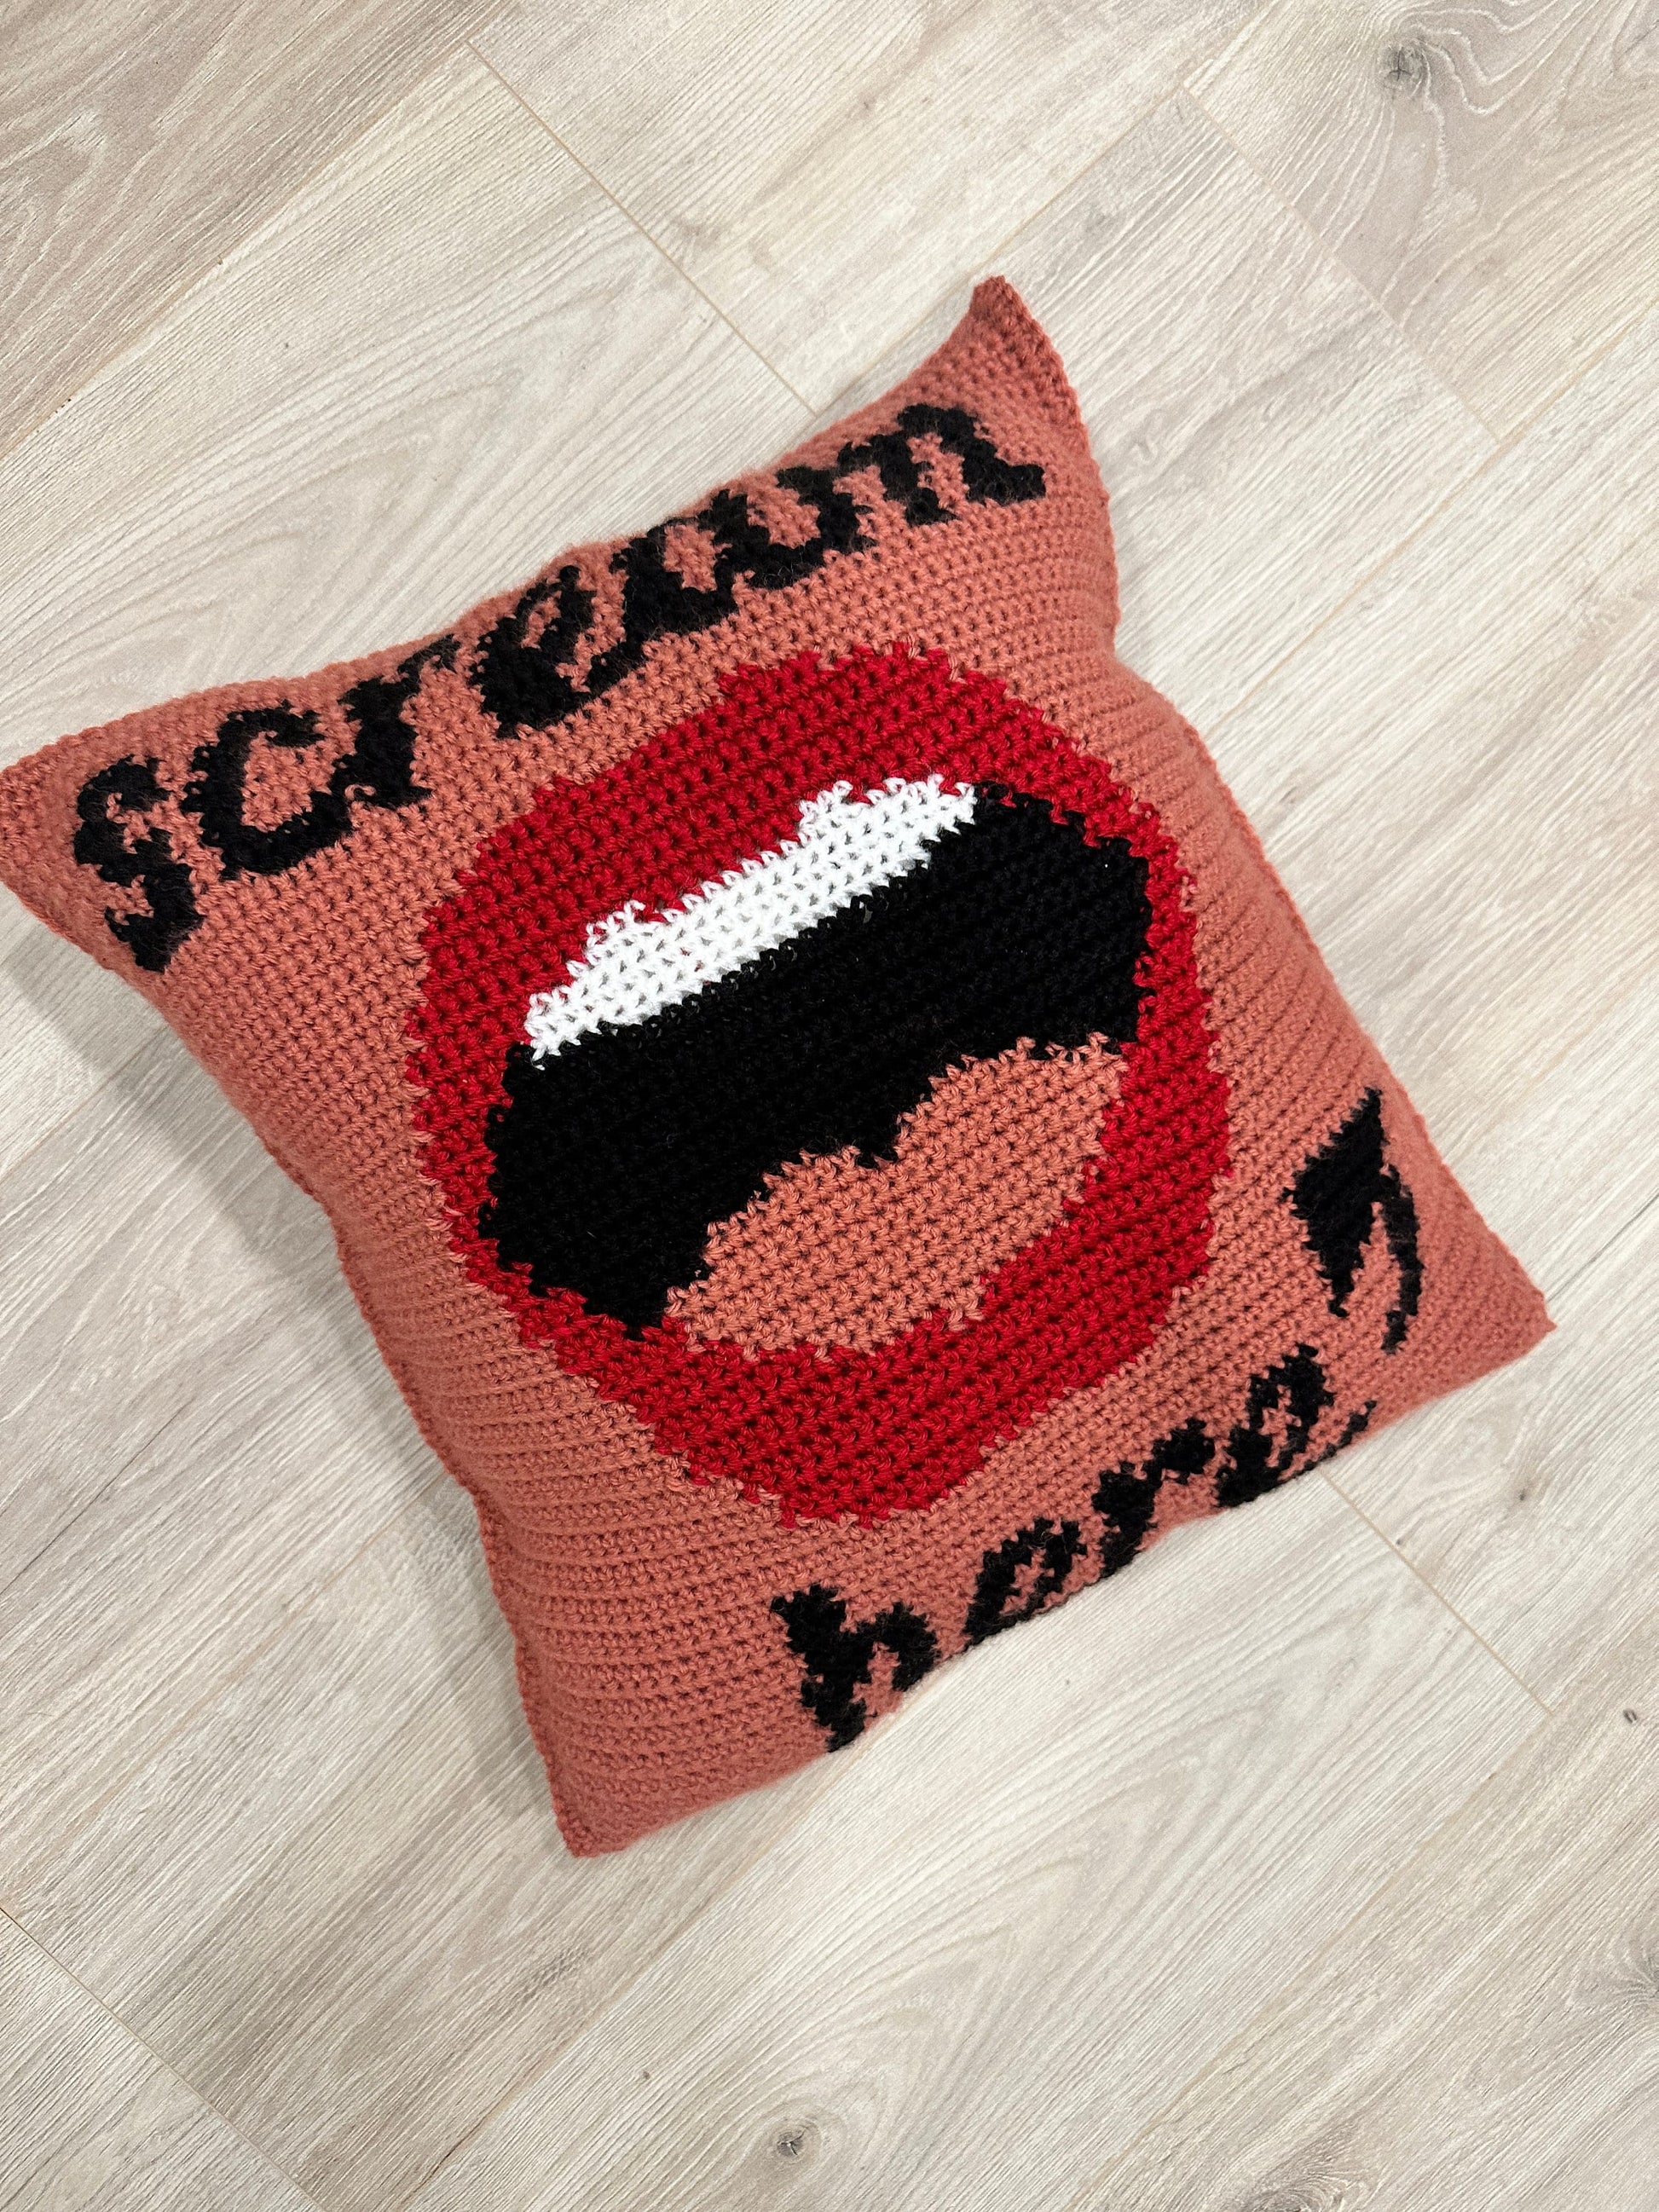 FINISHED CROCHET PILLOW (ready to ship)- Scream Here Crochet Pillow